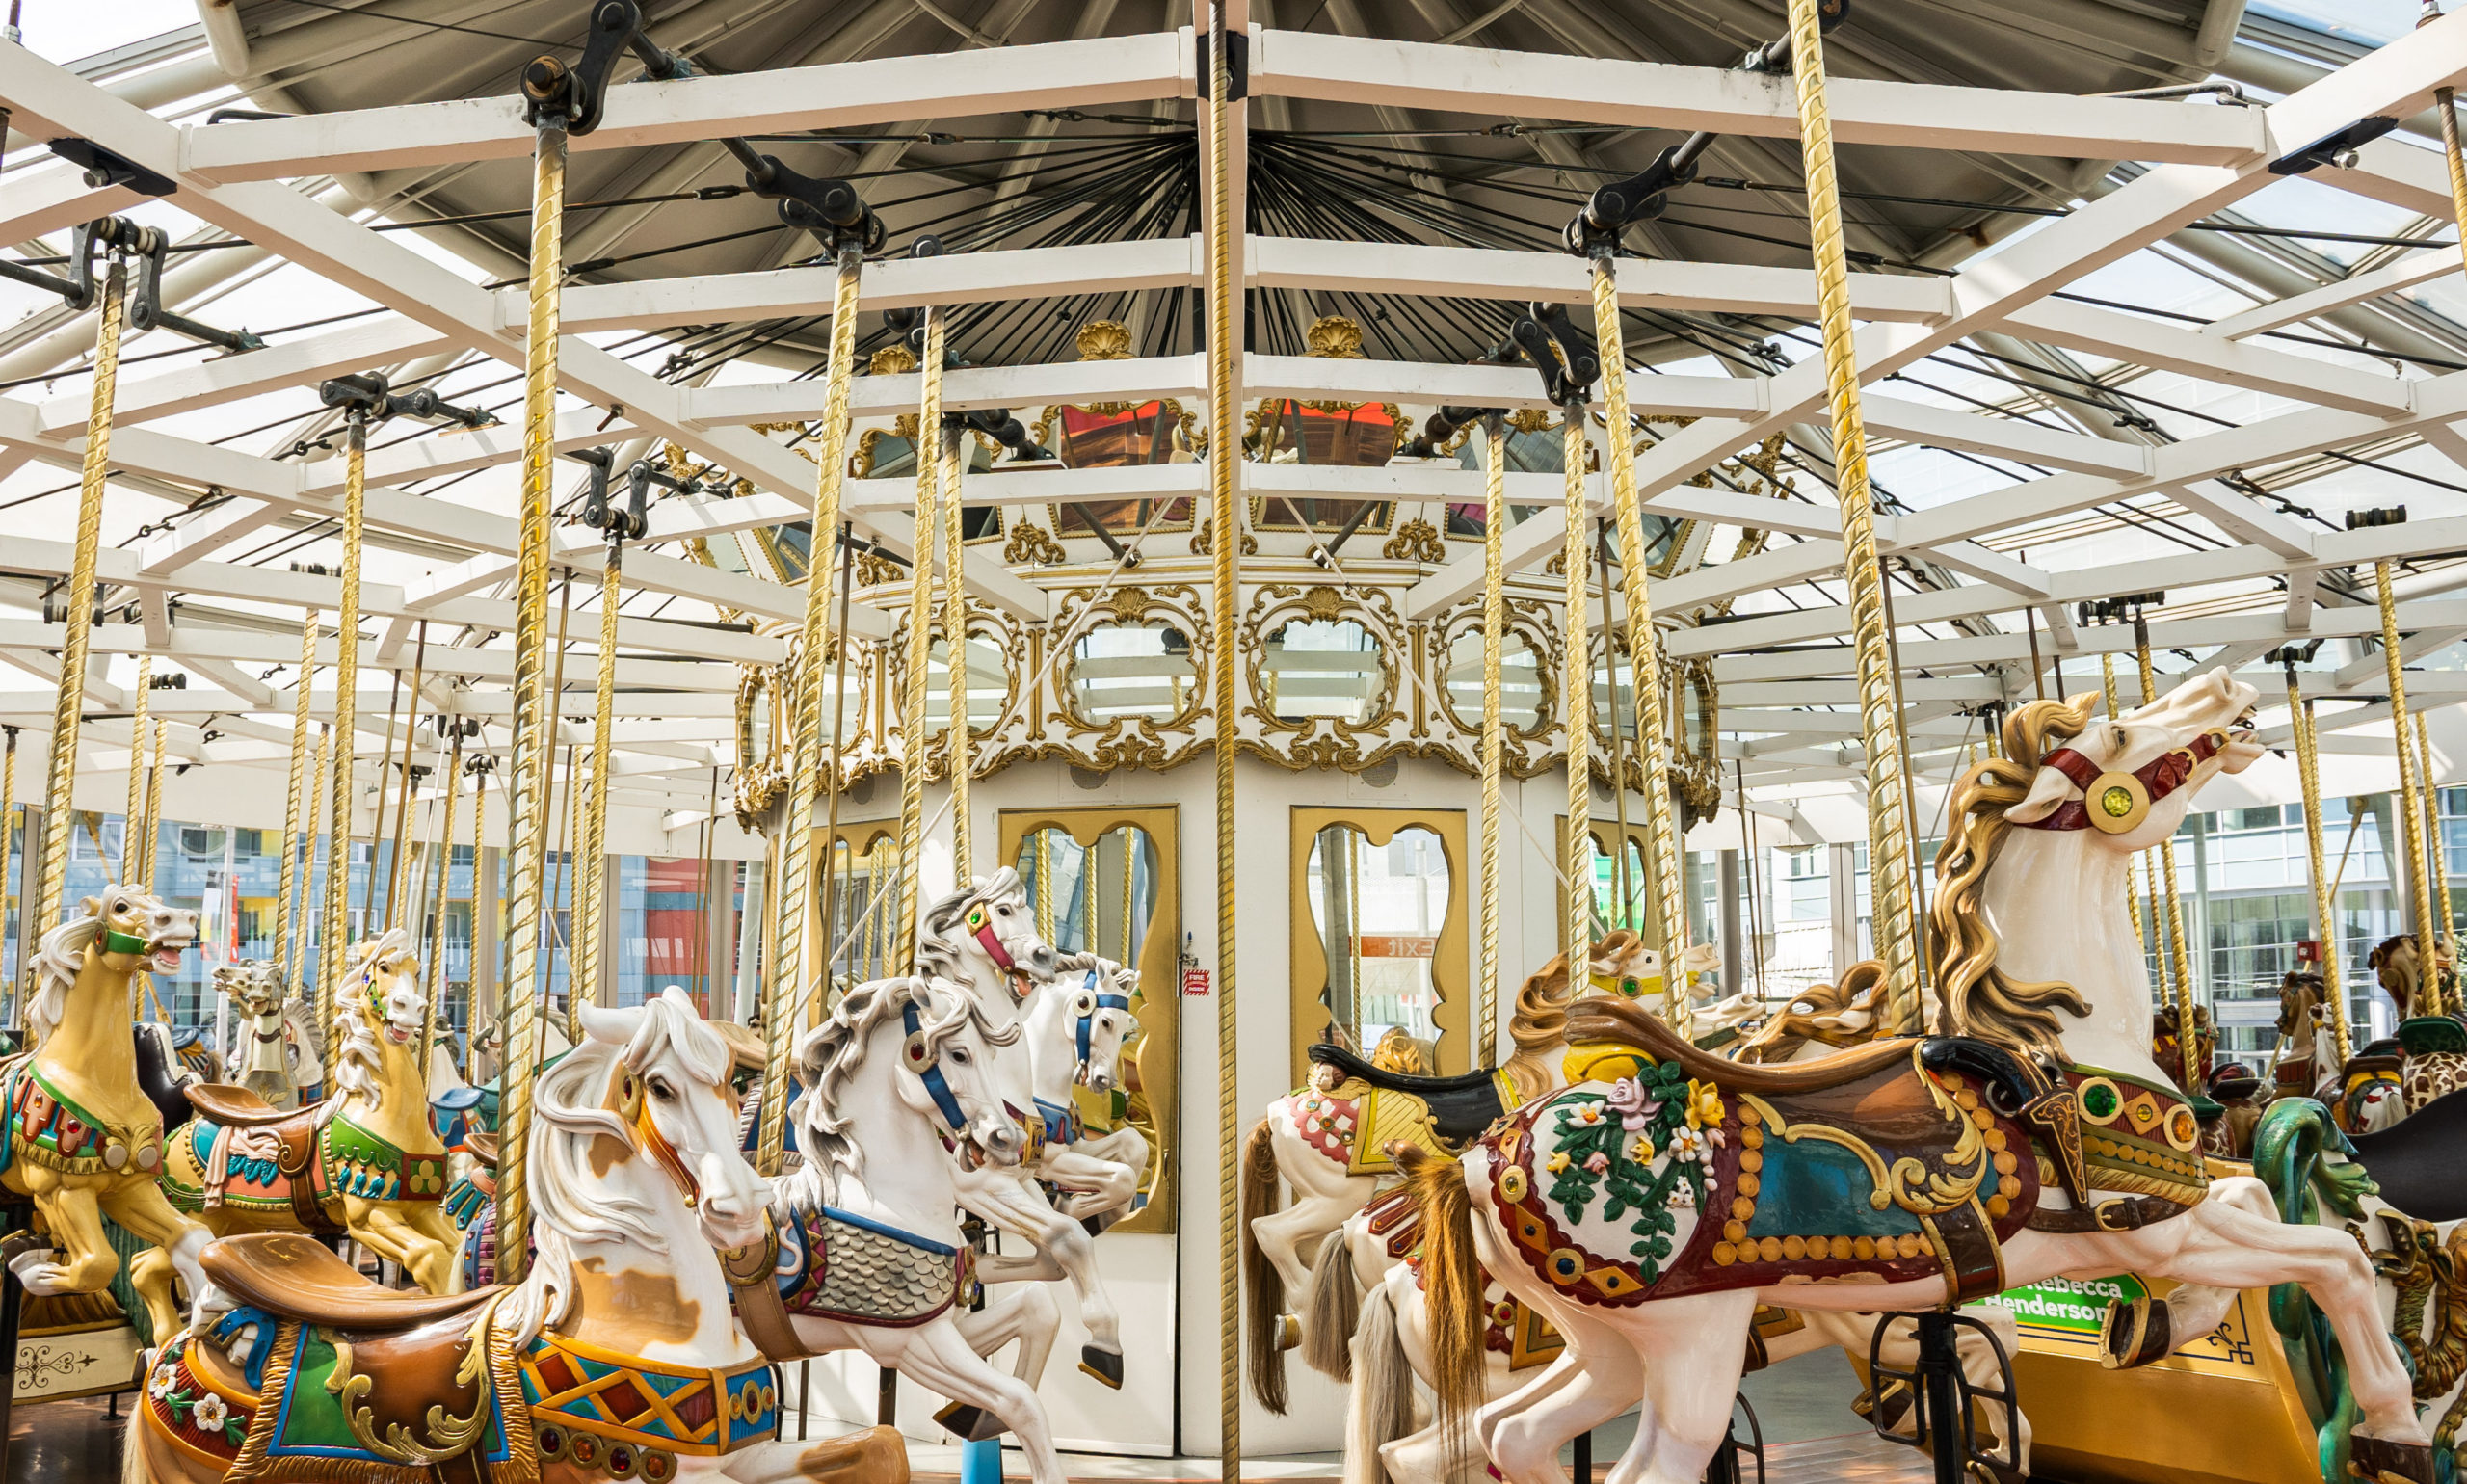 Leroy King historical Carousel with carousel horses